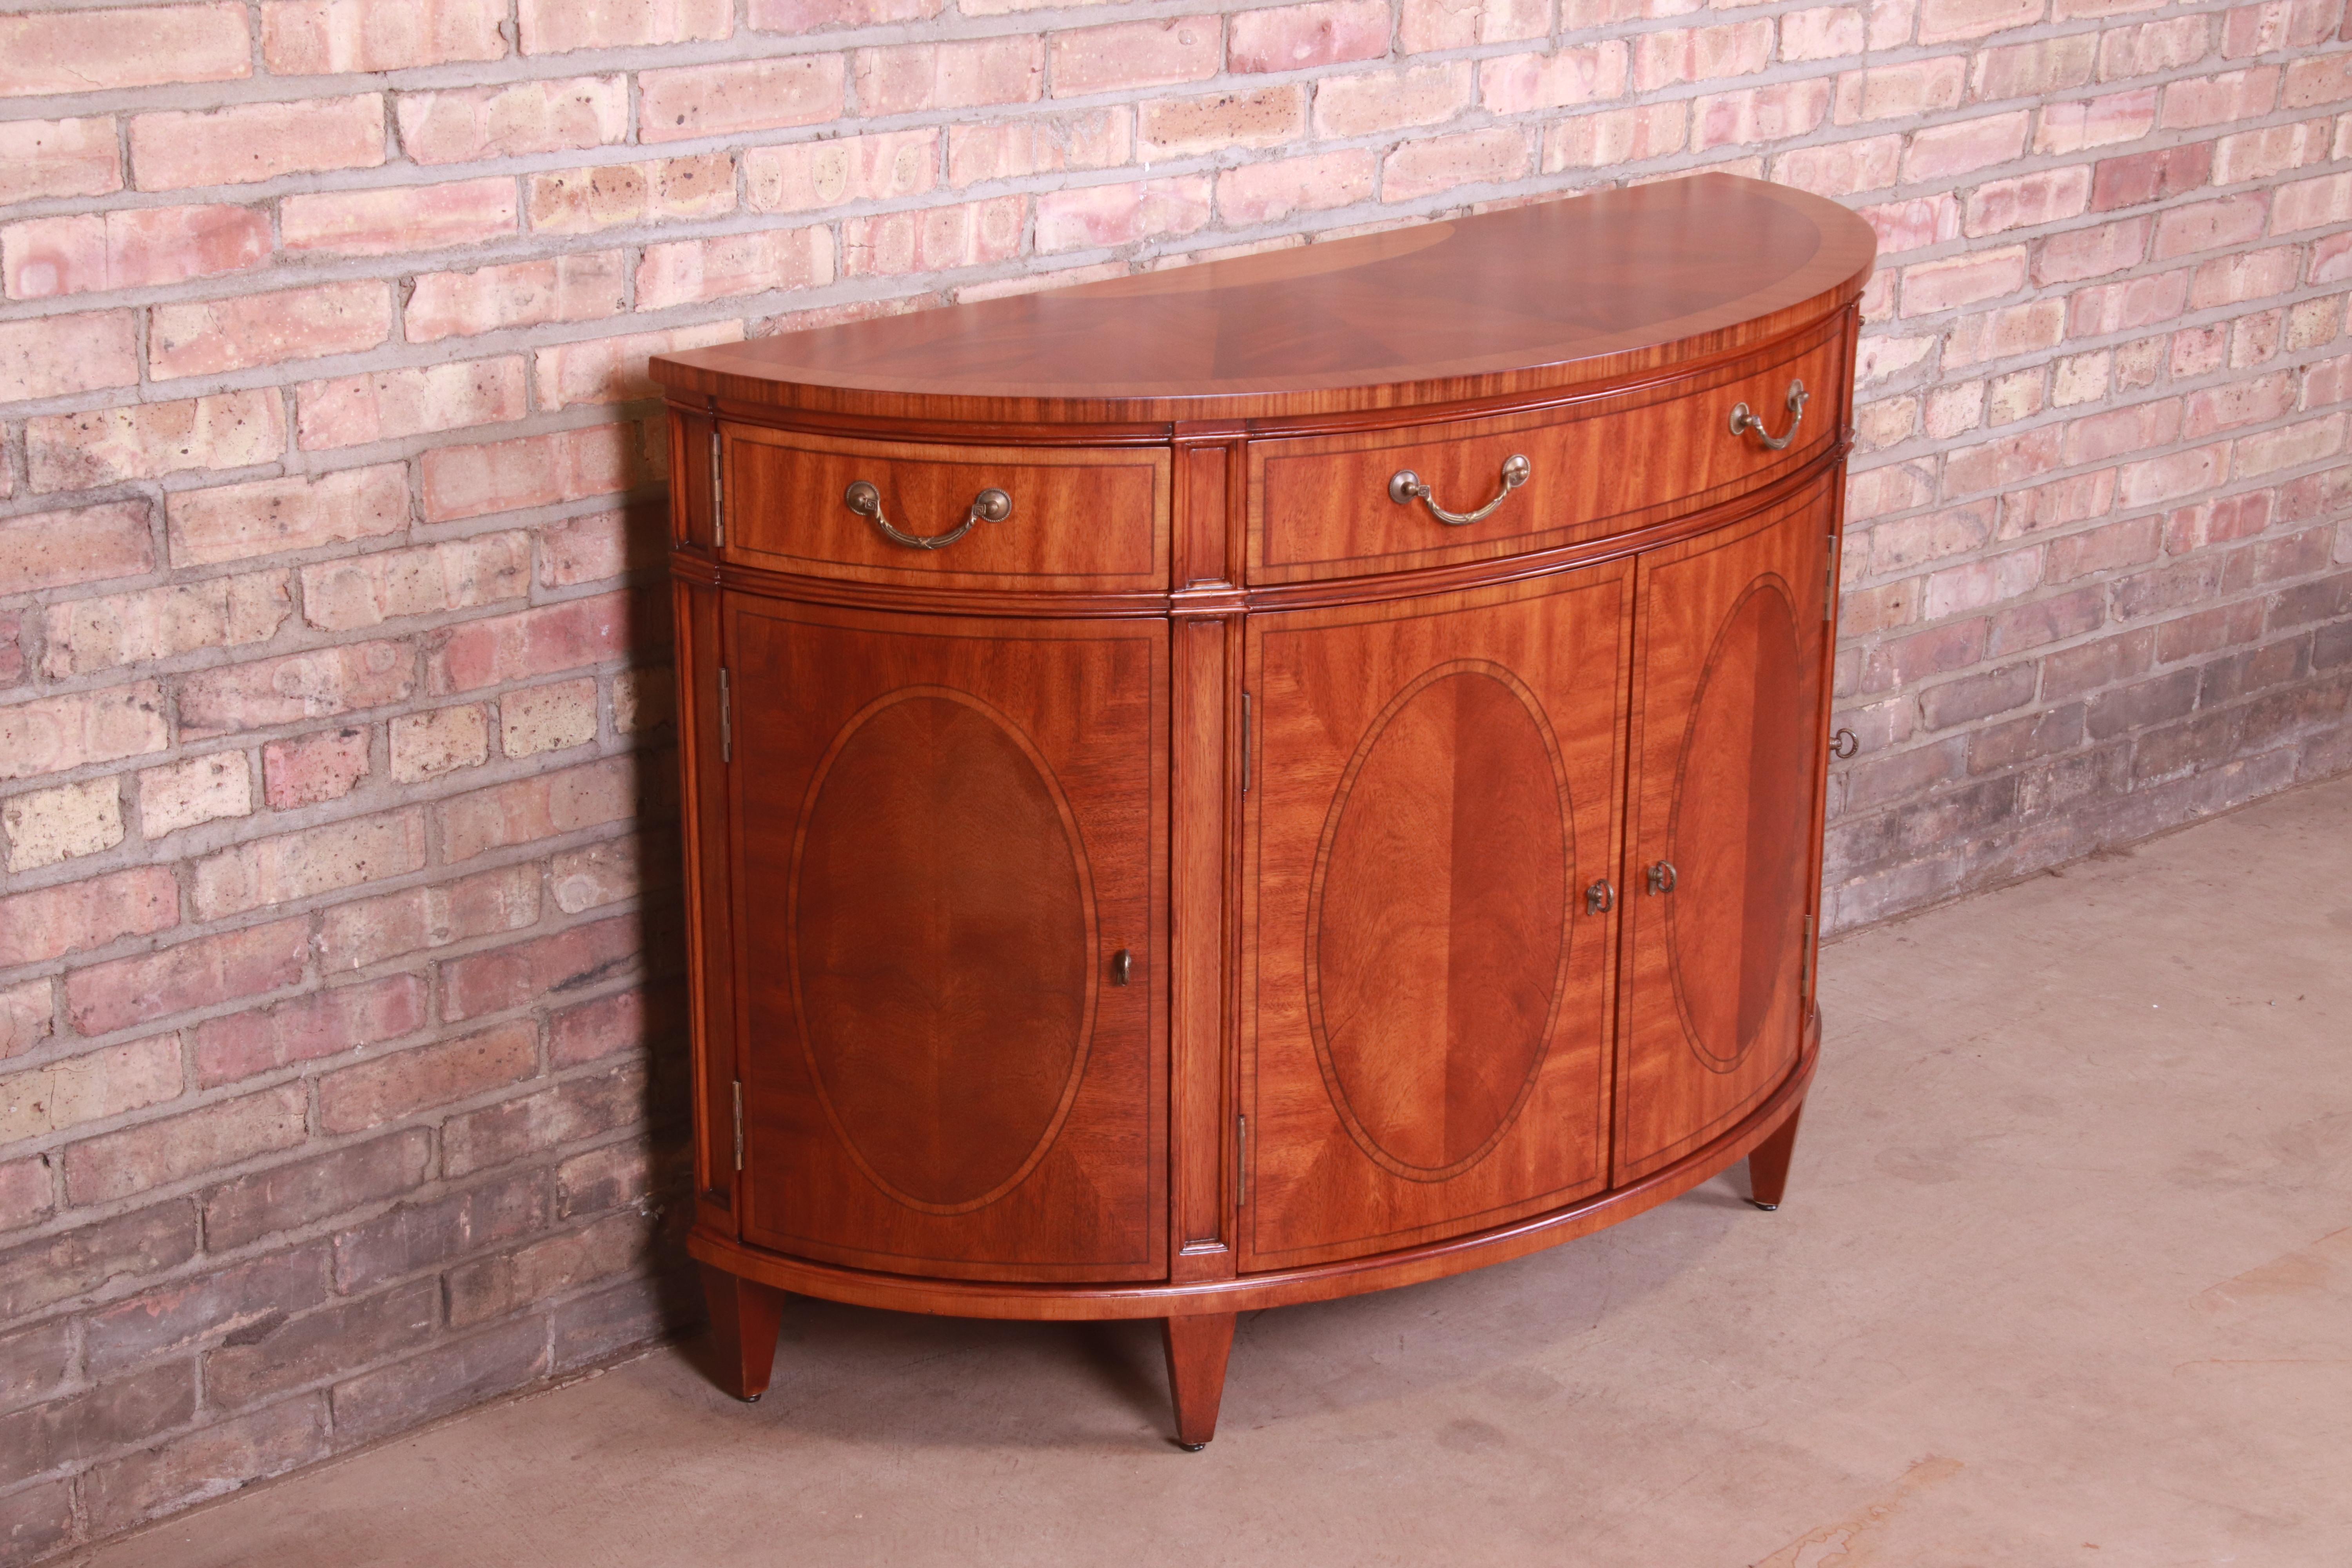 American Ethan Allen Regency Inlaid Mahogany Demilune Console or Bar Cabinet, Refinished